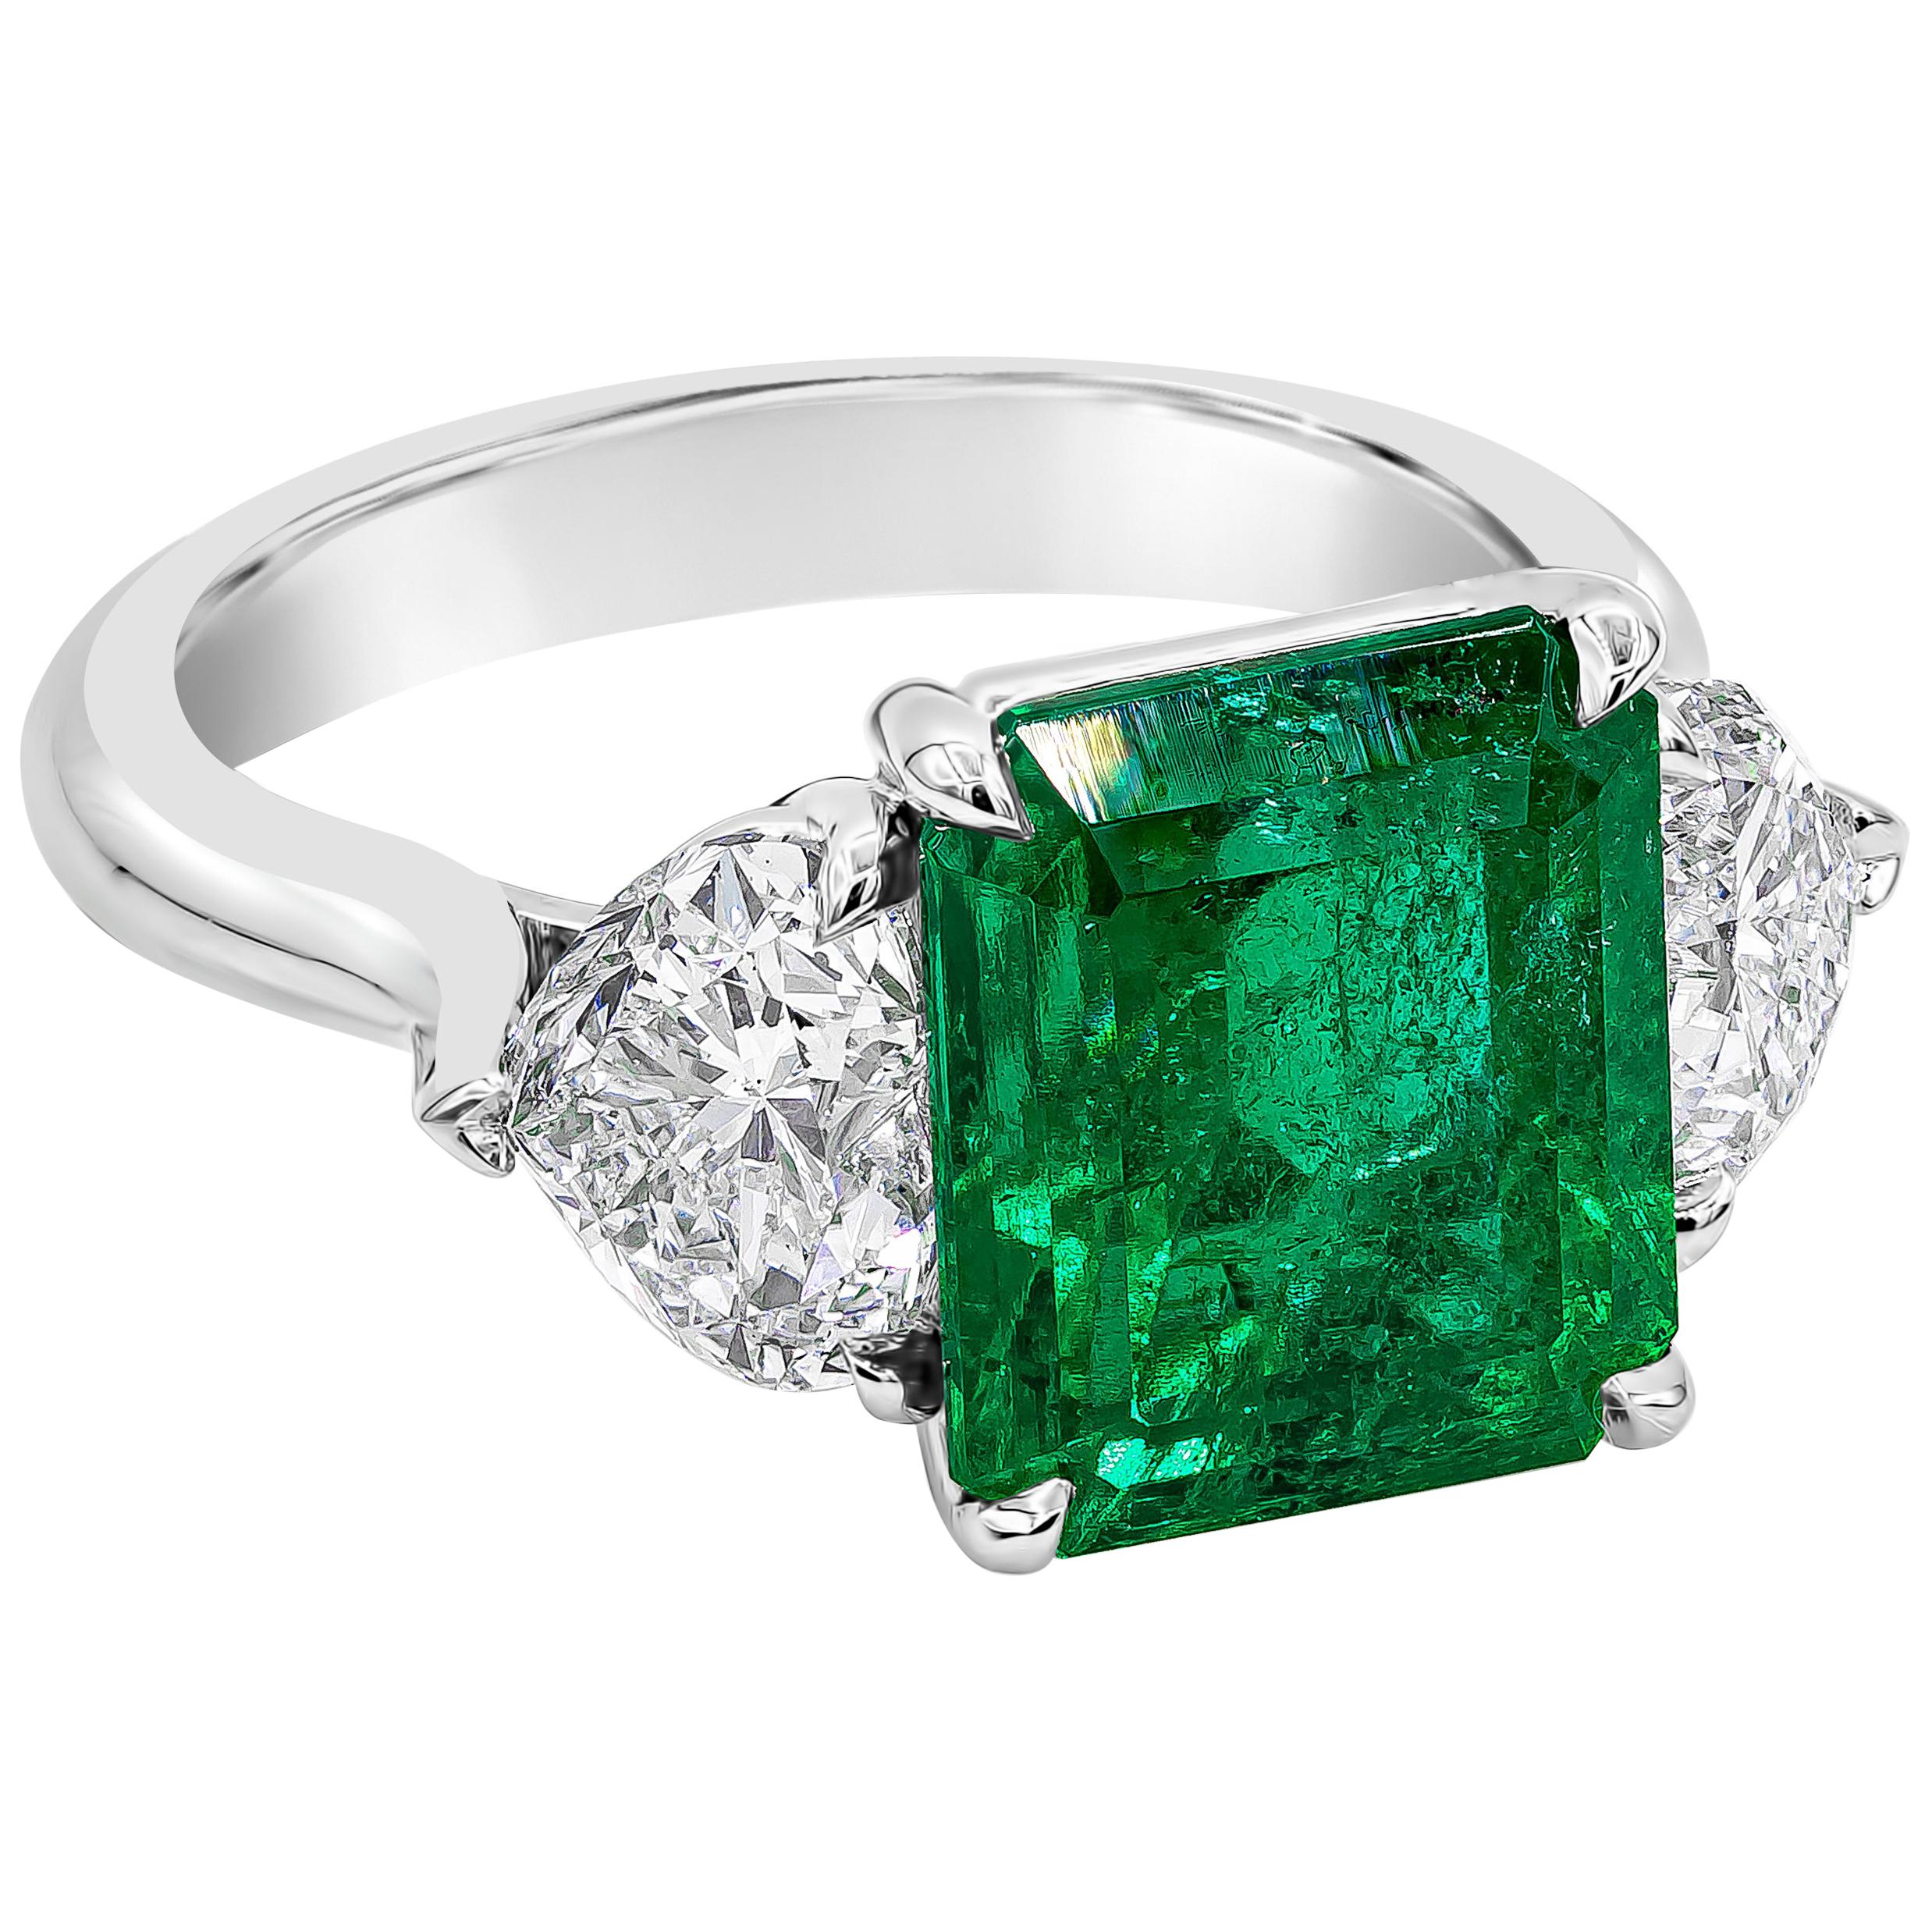 GIA Certified 4.46 Carat Emerald Cut Colombian Emerald & Diamond Engagement Ring For Sale